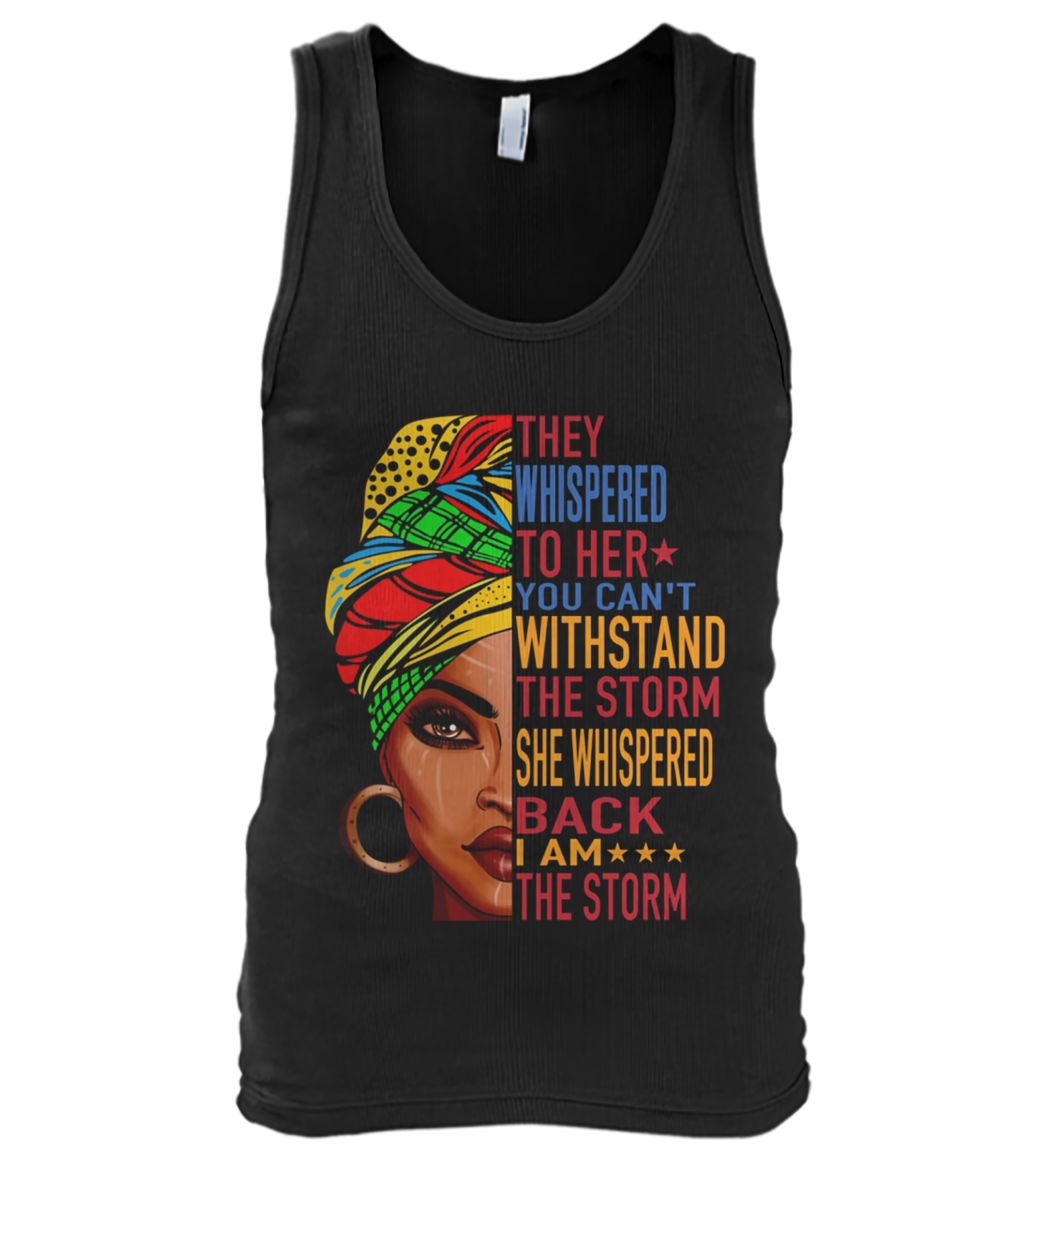 Feminist they whispered to her you can't withstand the storm she shispered back I am the storm men's tank top